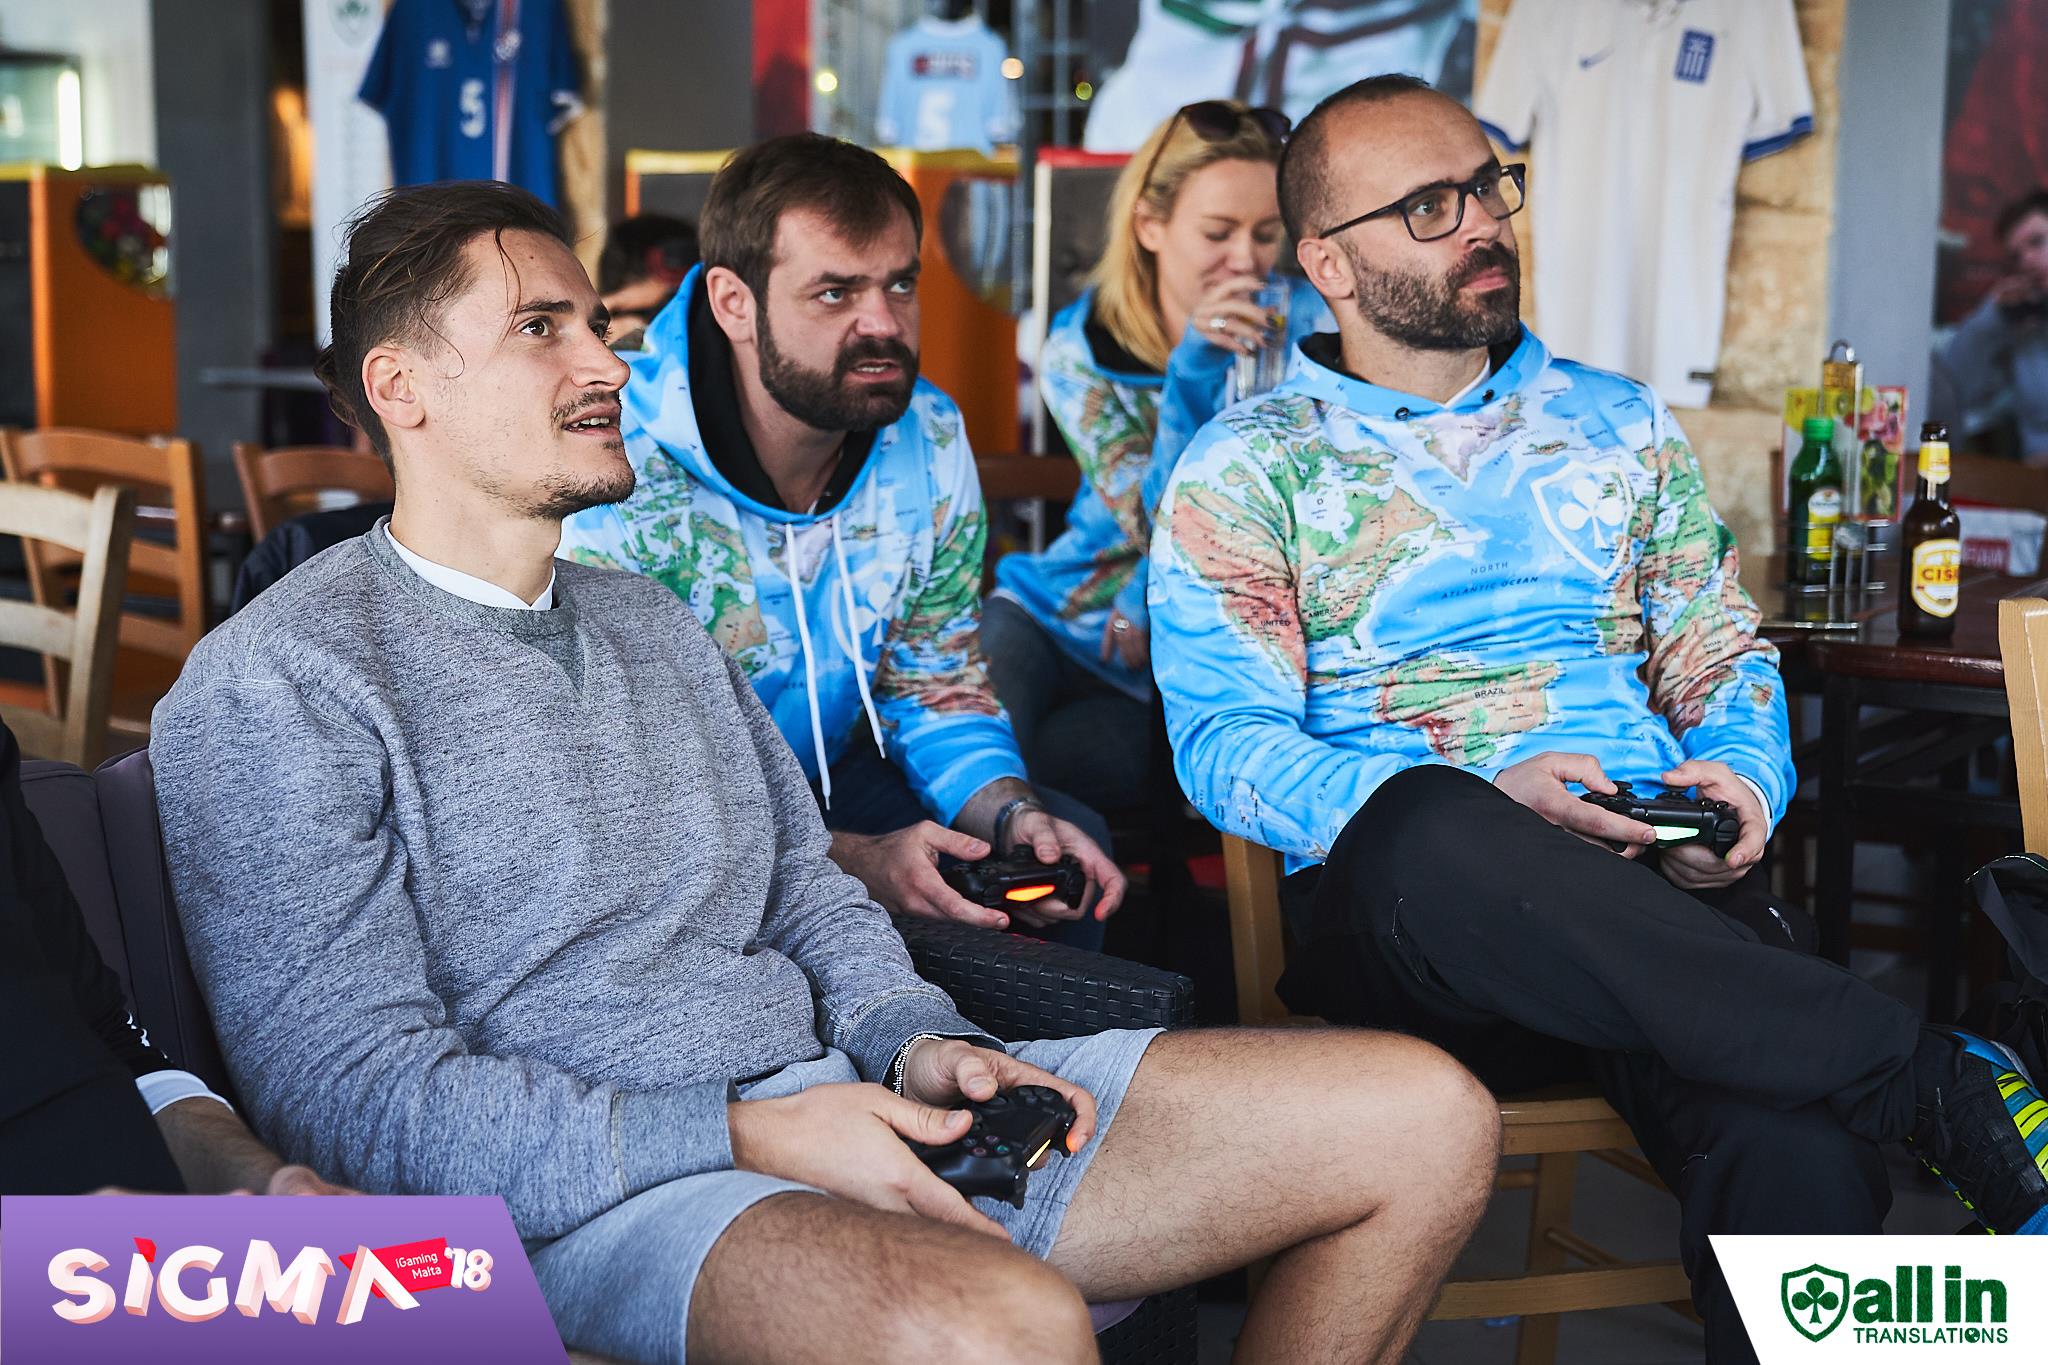 Three players playing PES Esports Tournament in SiGMA 2018